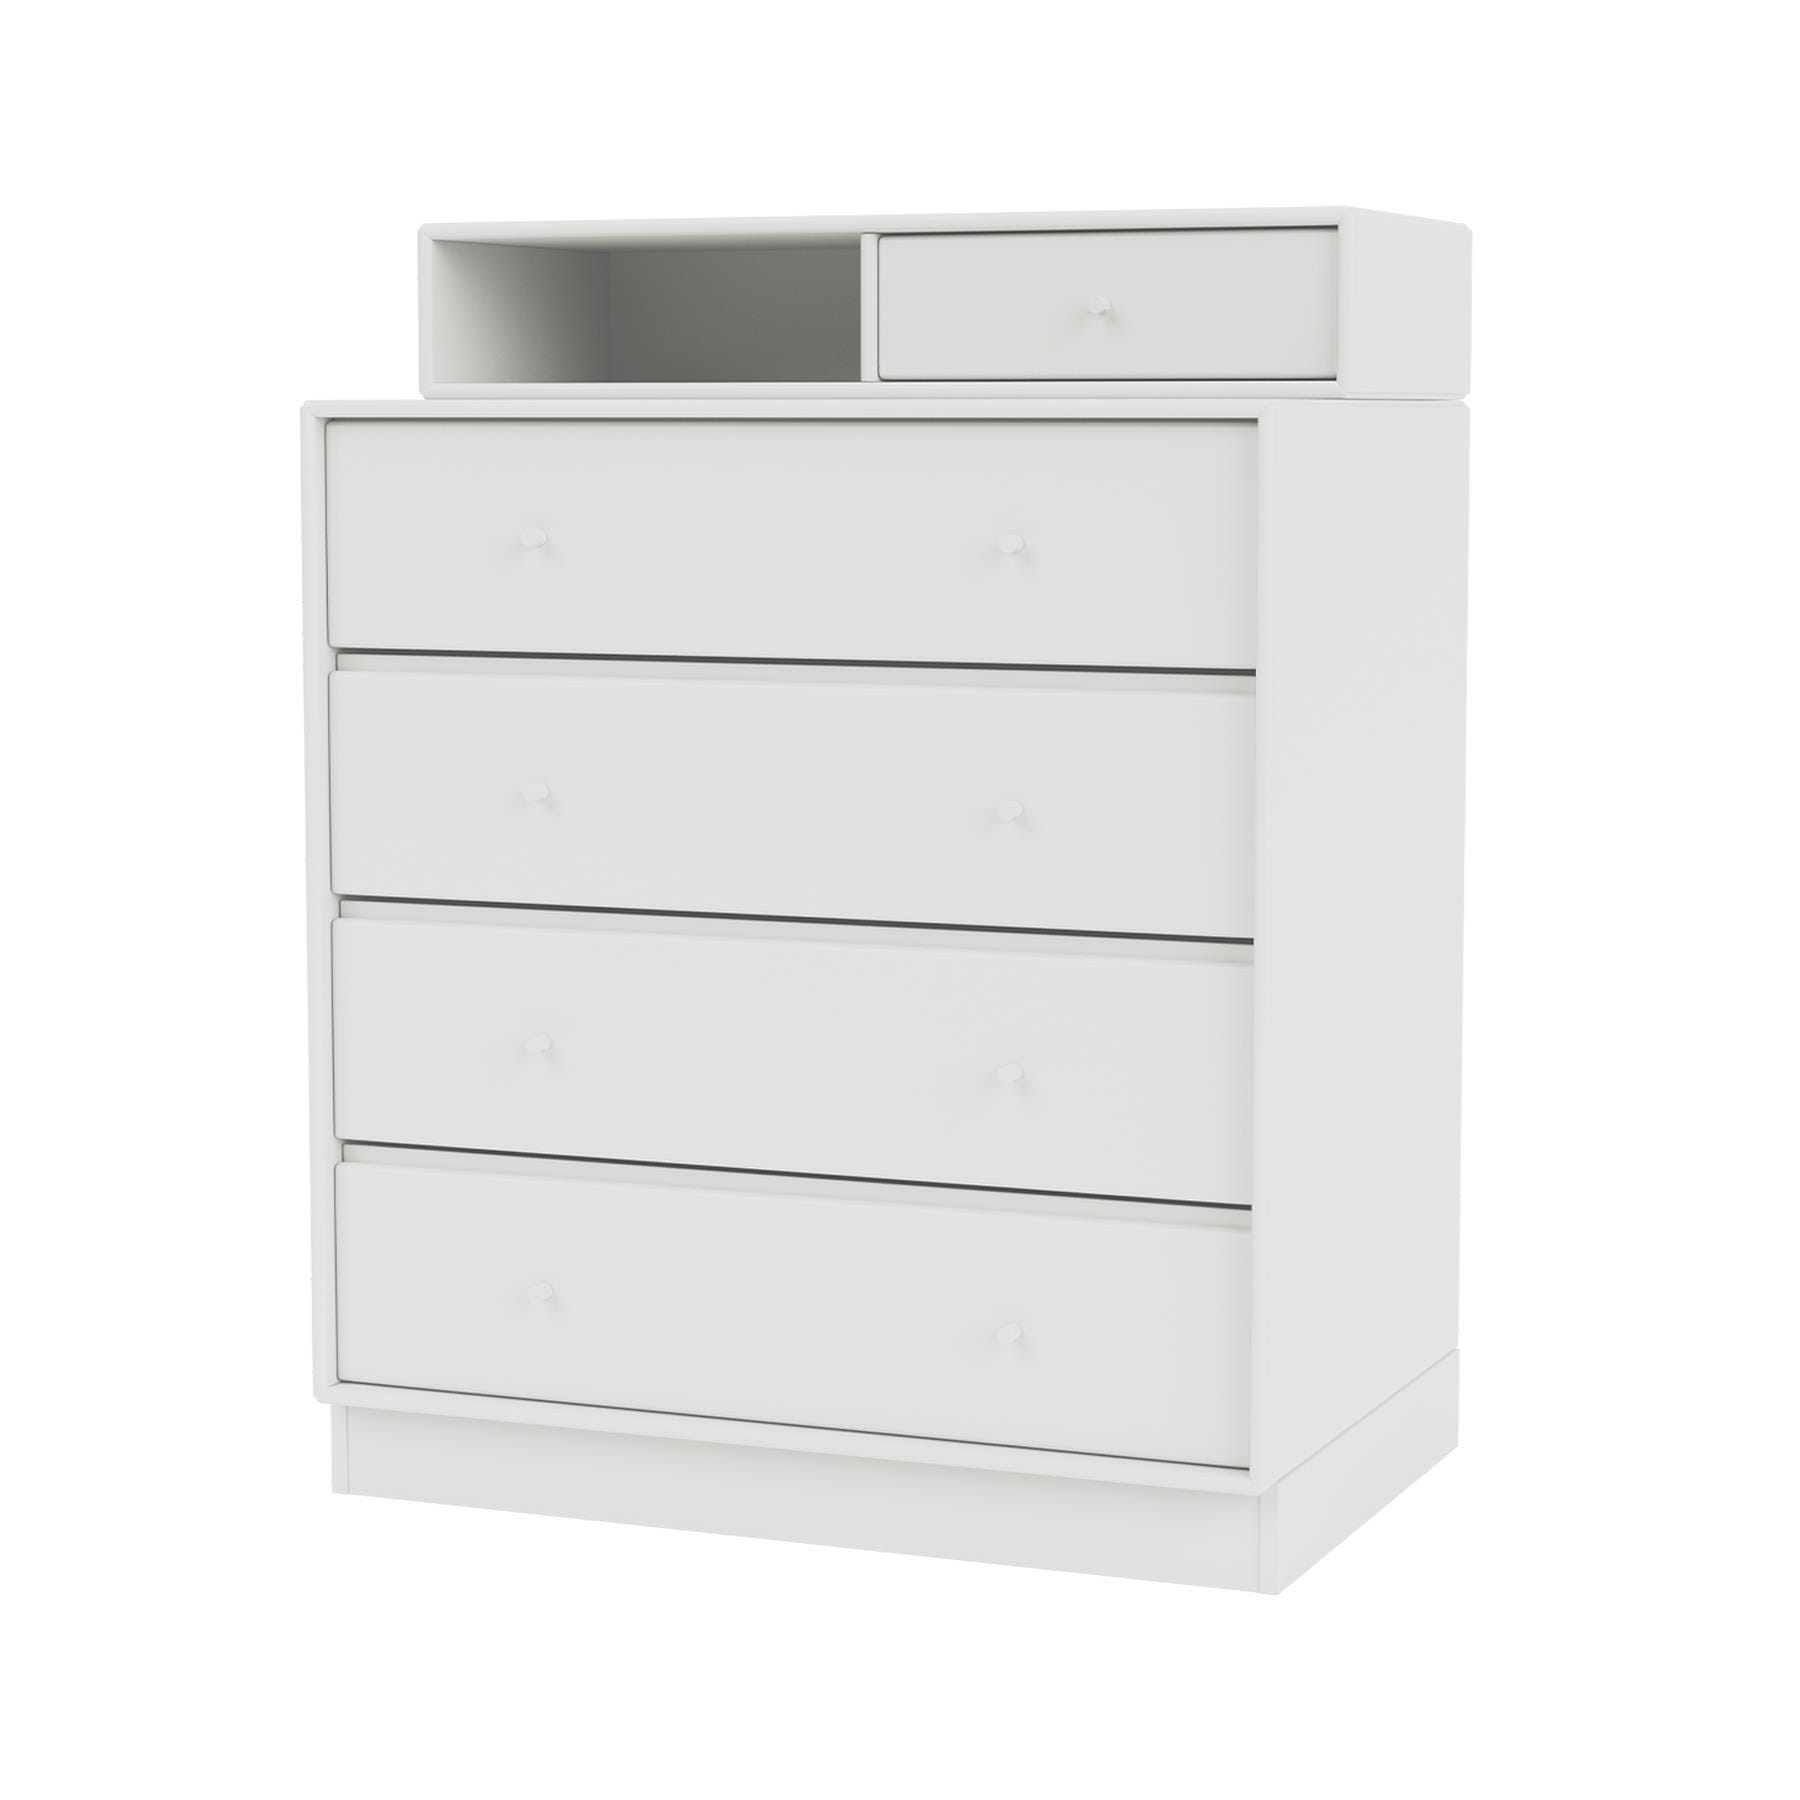 Montana Keep Chest Of Drawers White Plinth White Designer Furniture From Holloways Of Ludlow